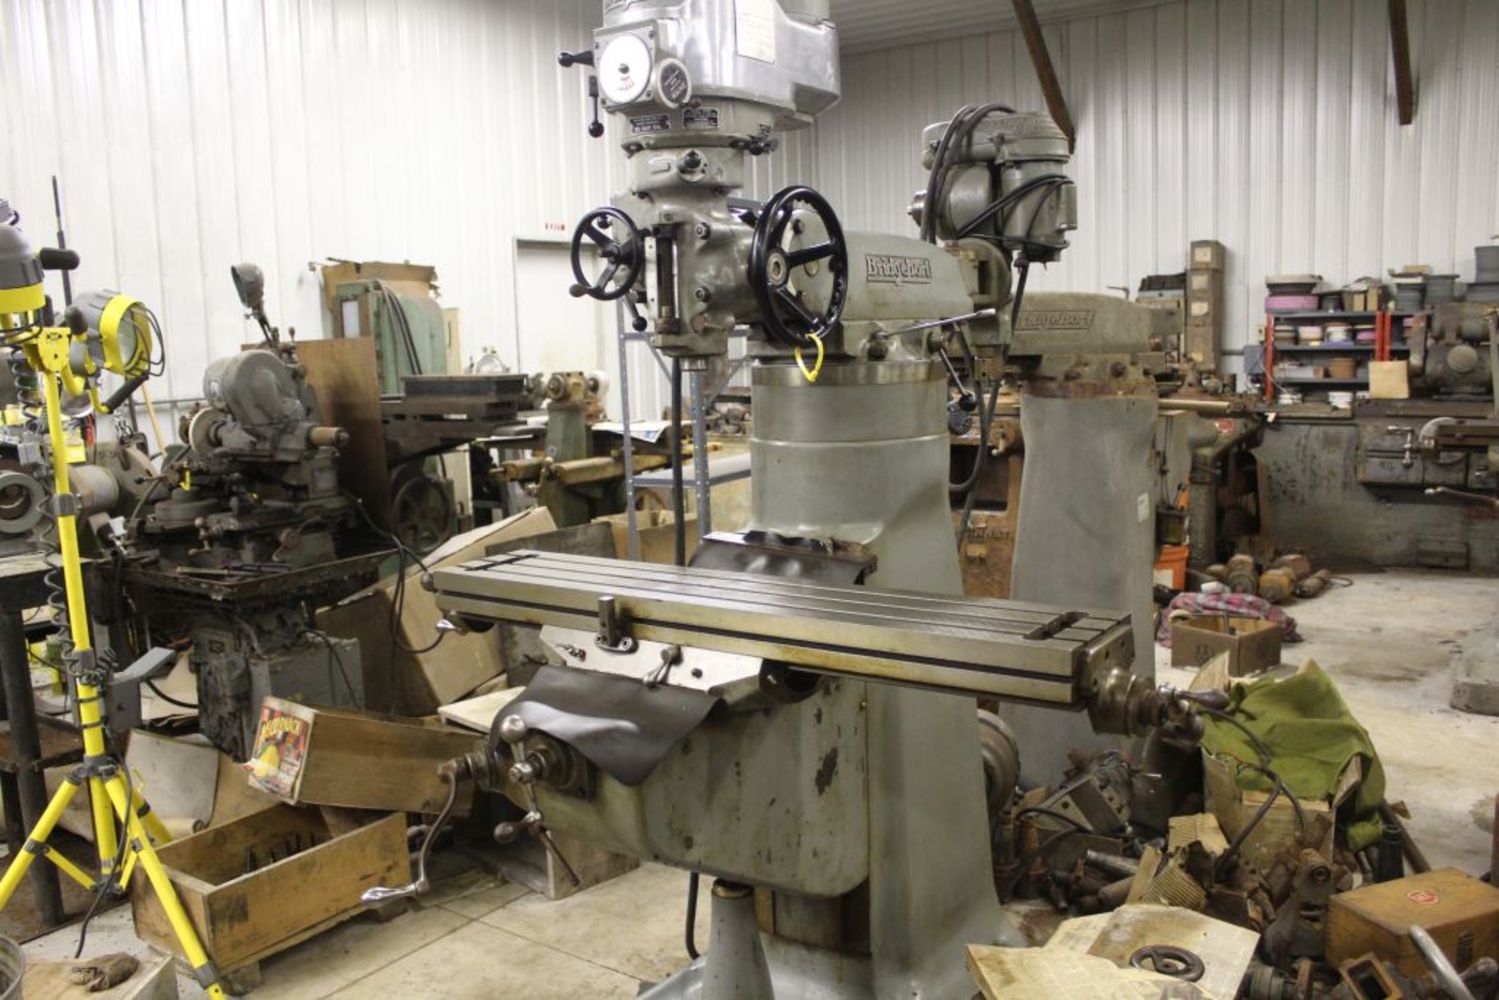 Machine Shop Auction - Machinery equipment, 20 Ton unused steel, tooling, and general shop equipment